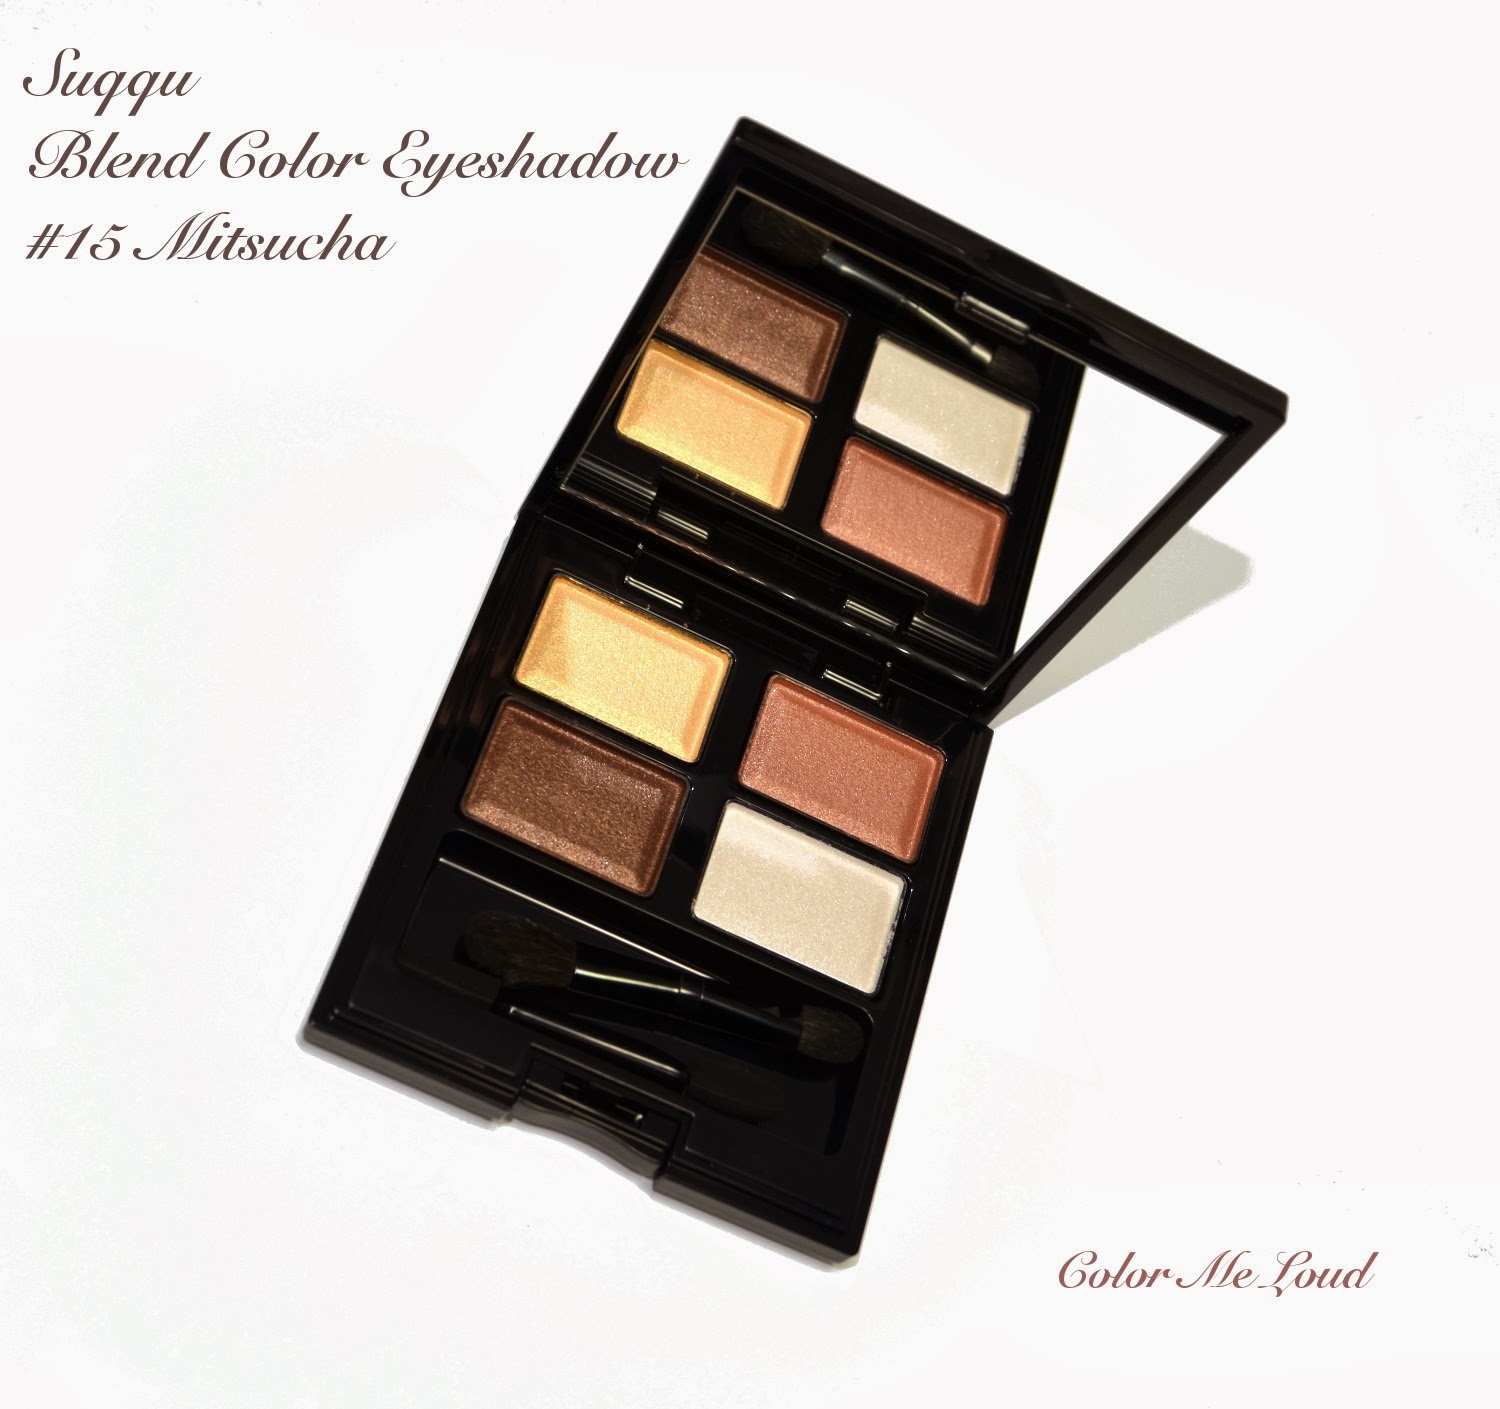 Suqqu Blend Color Eyeshadow #15 Mitsucha for Spring 2014, FOTD, Swatch & Review